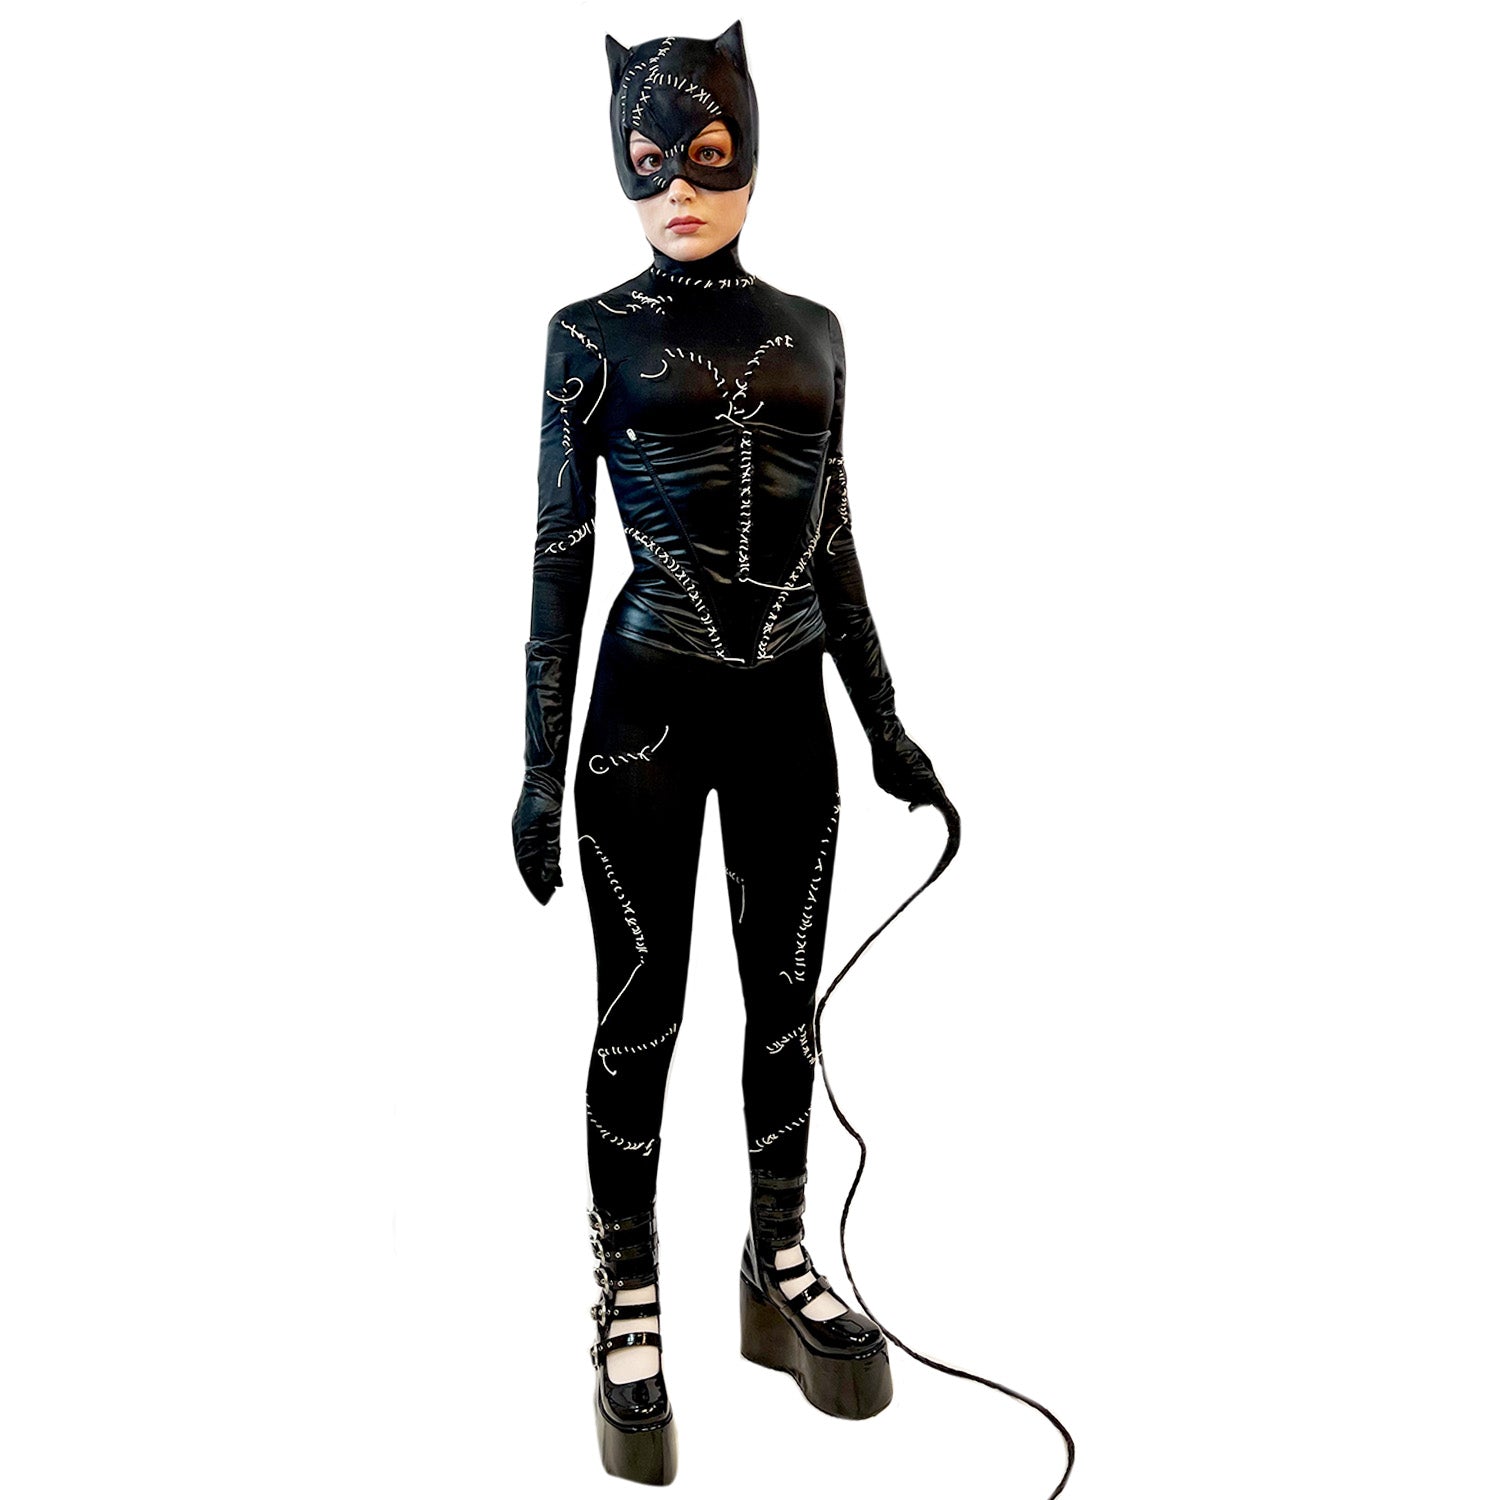 LICENSED GRAND HERITAGE CATWOMAN ADULT WOMENS FANCY DRESS HALLOWEEN COSTUME